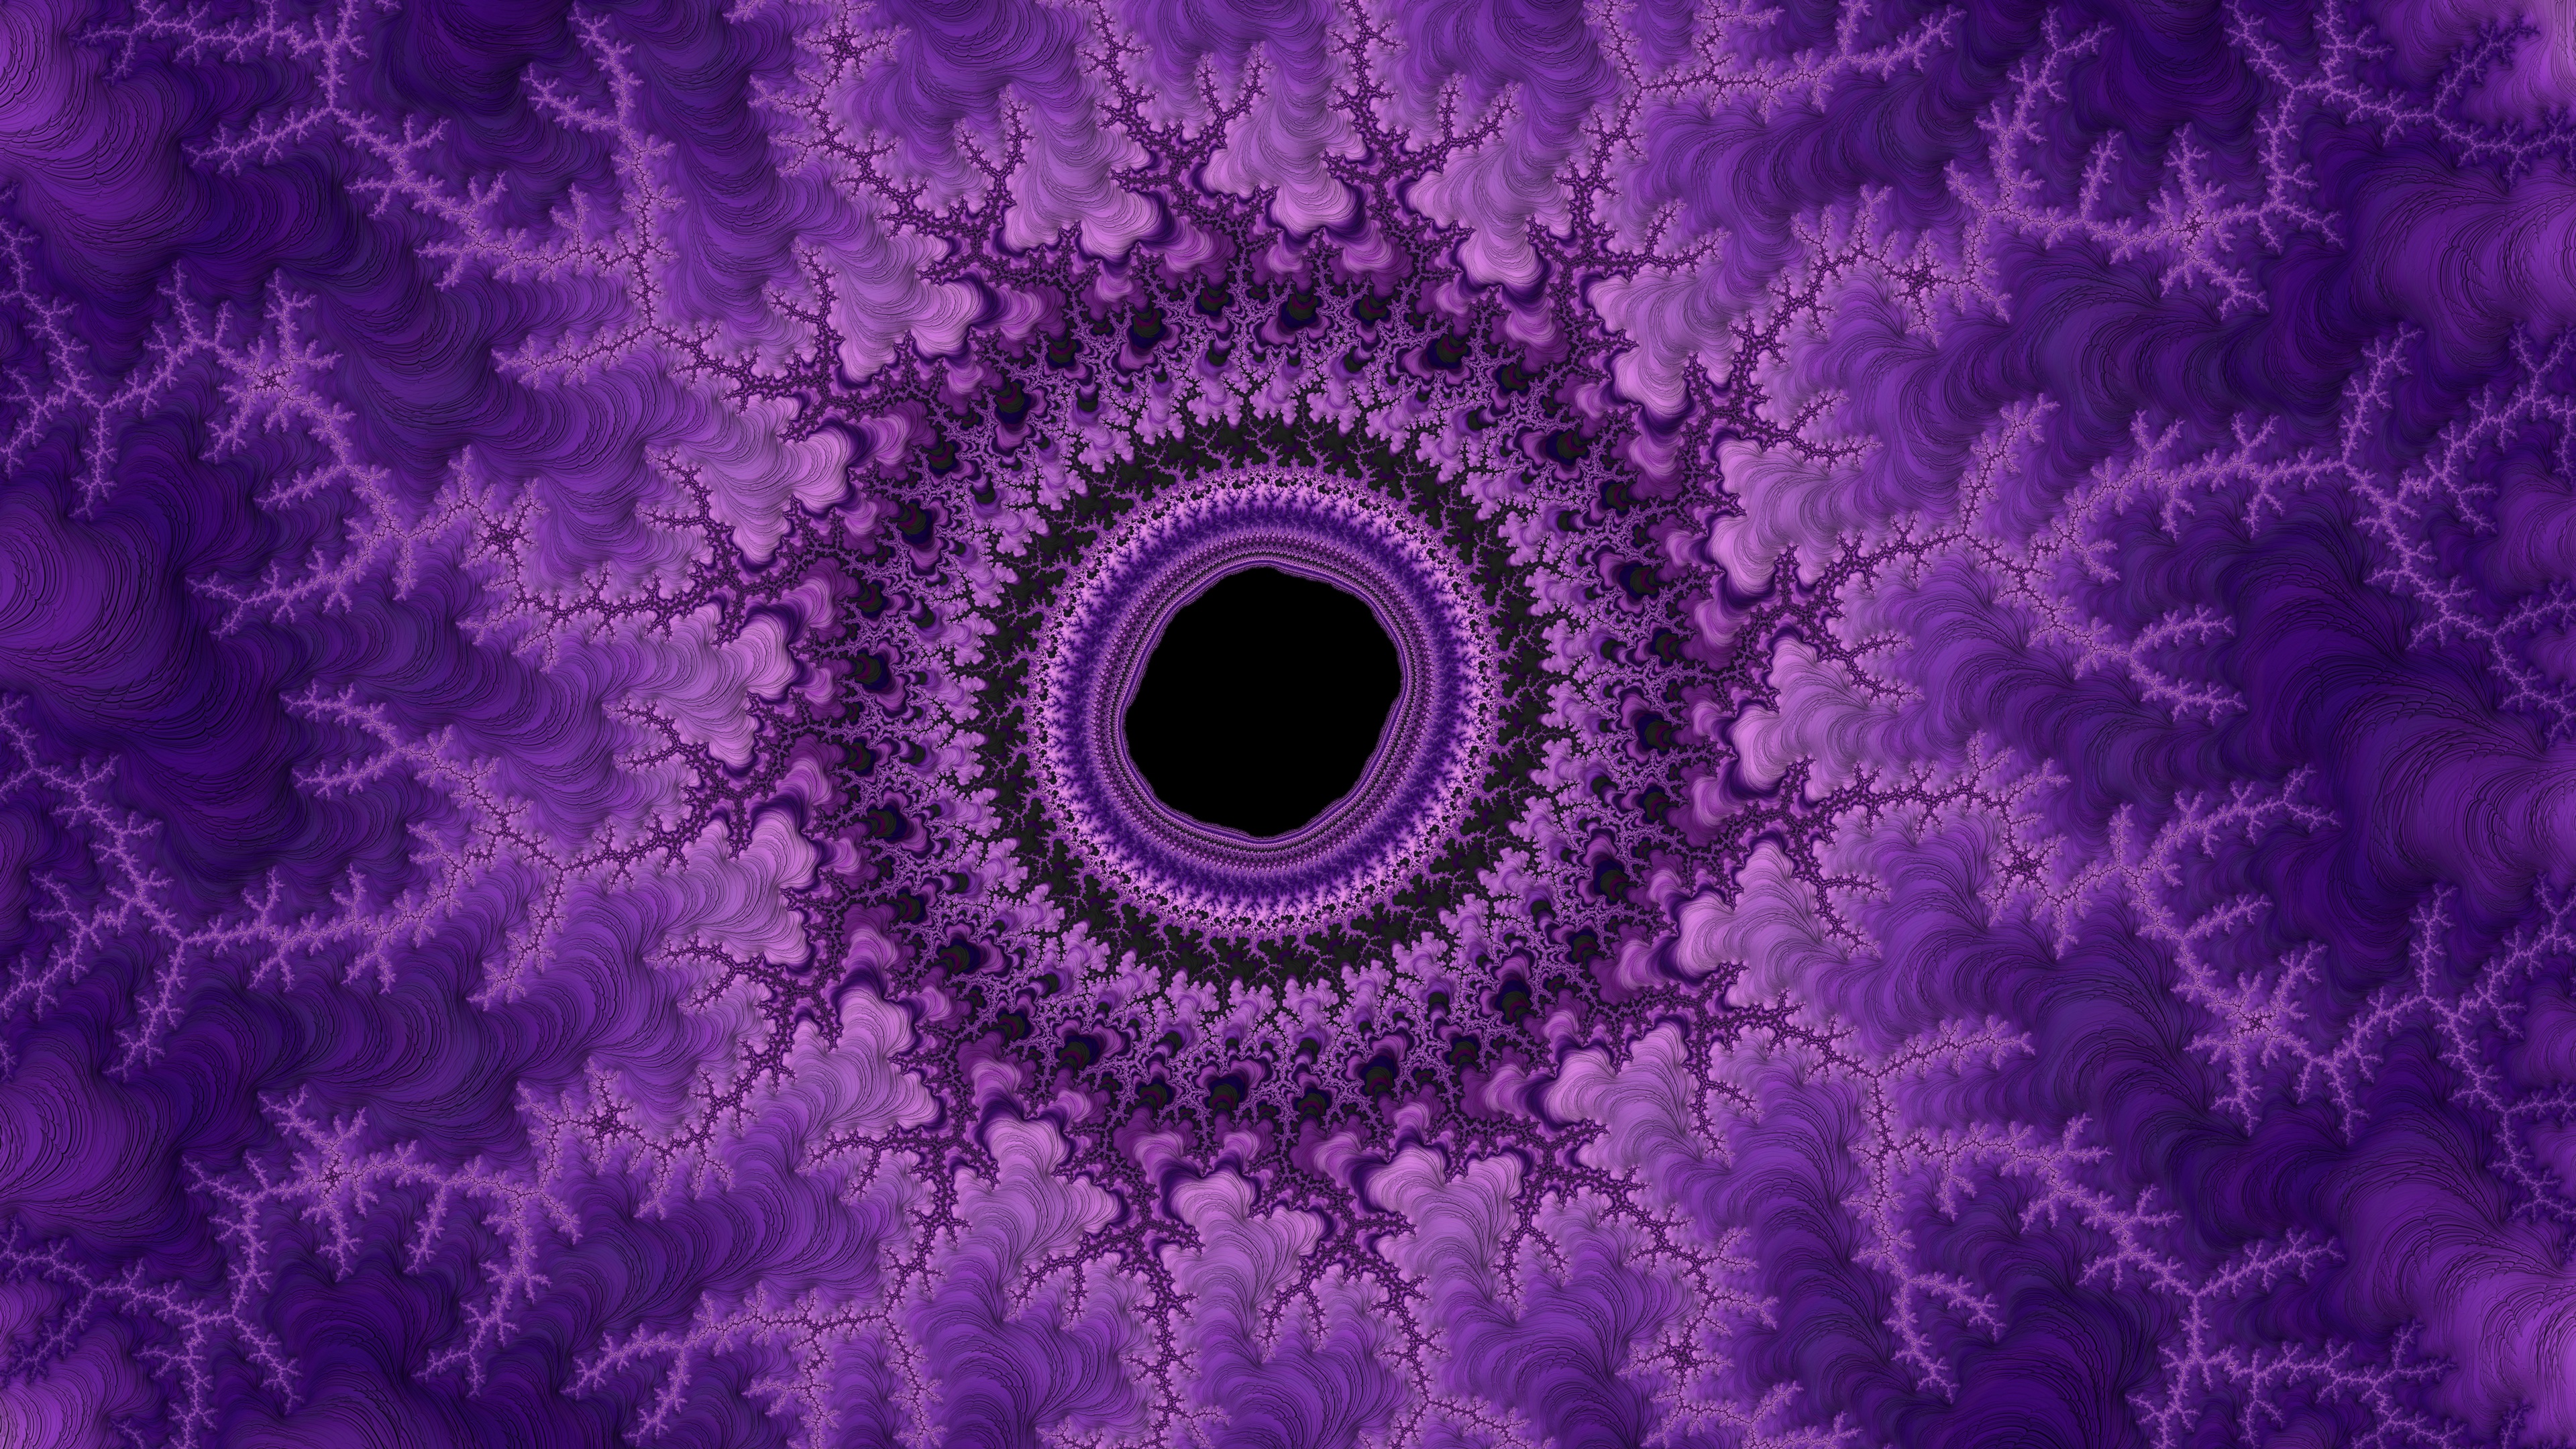 Fractal in the shape of a black hole